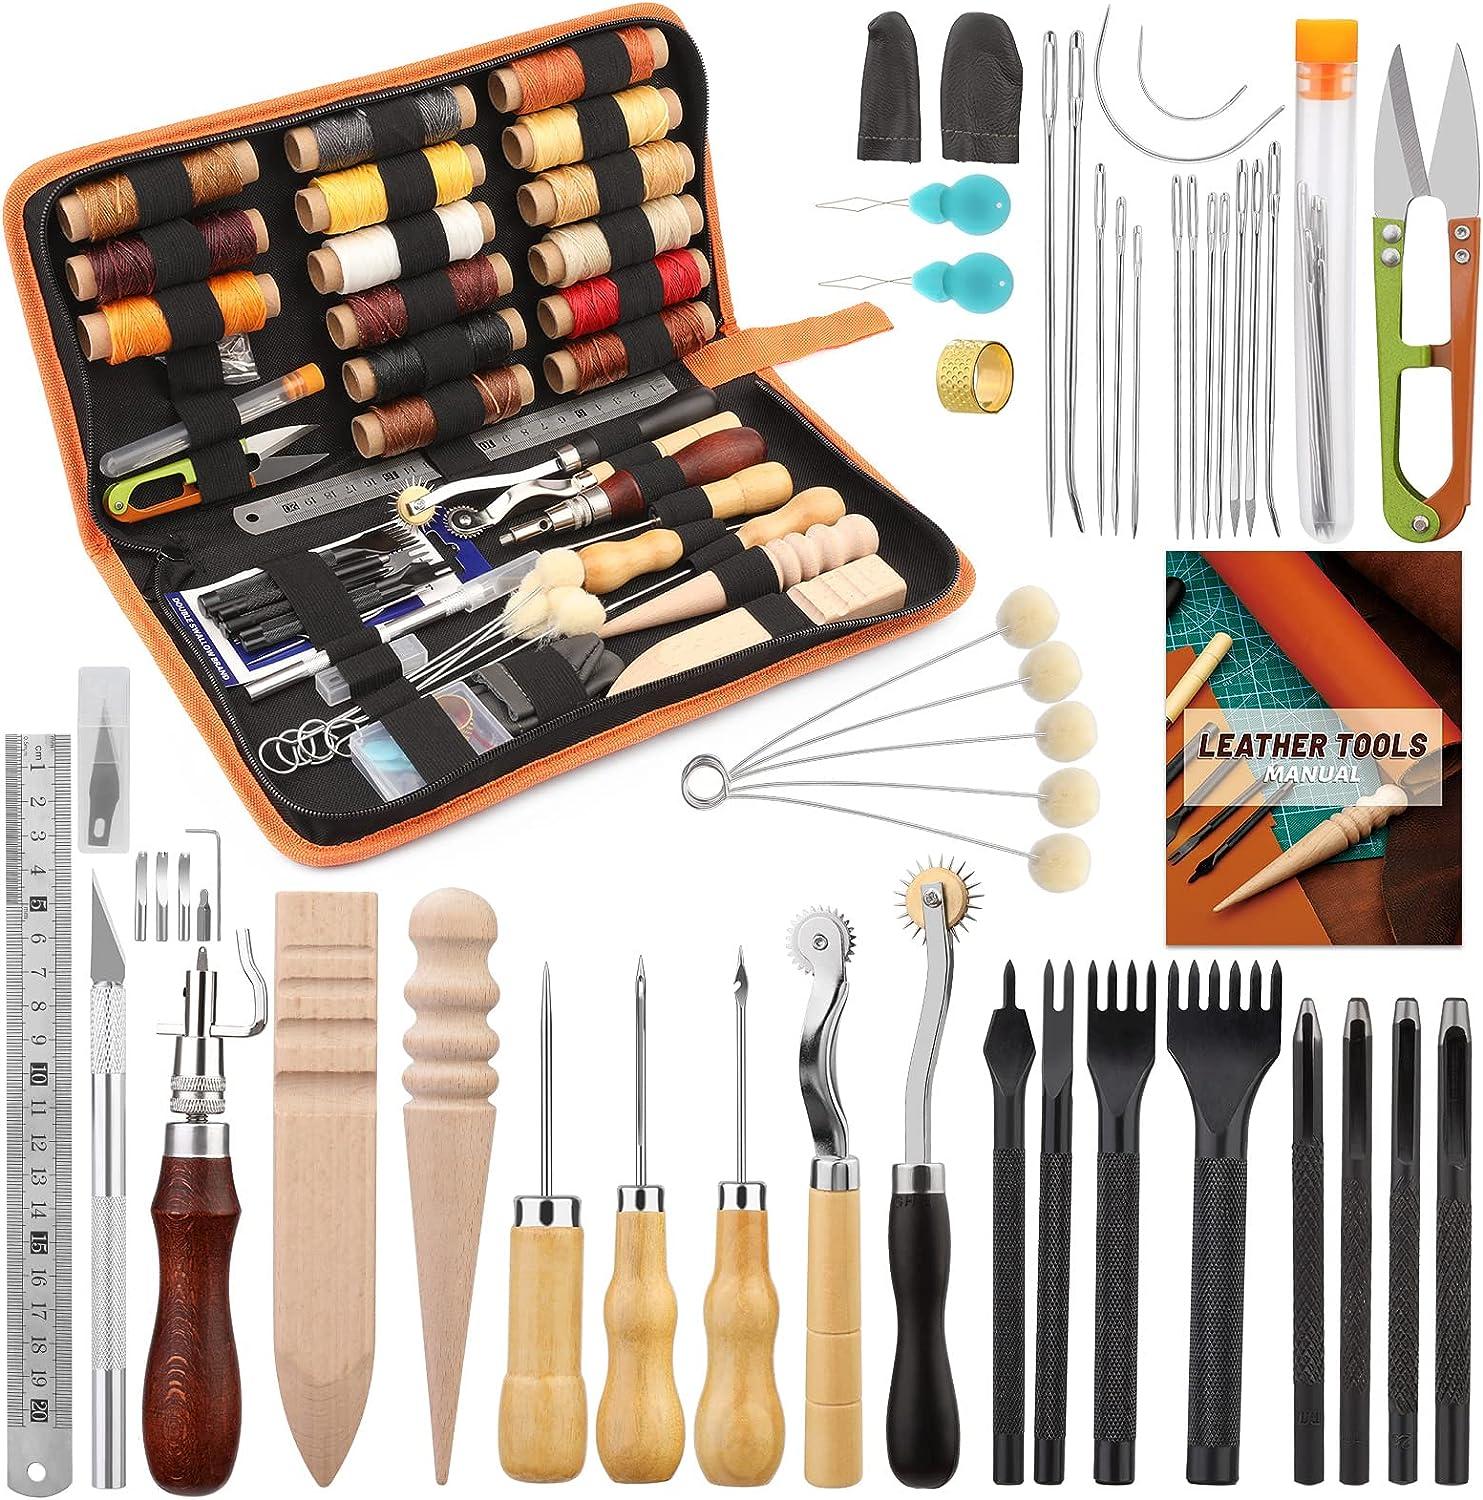 Leather Craft] 10 leather craft tools for beginners / basic